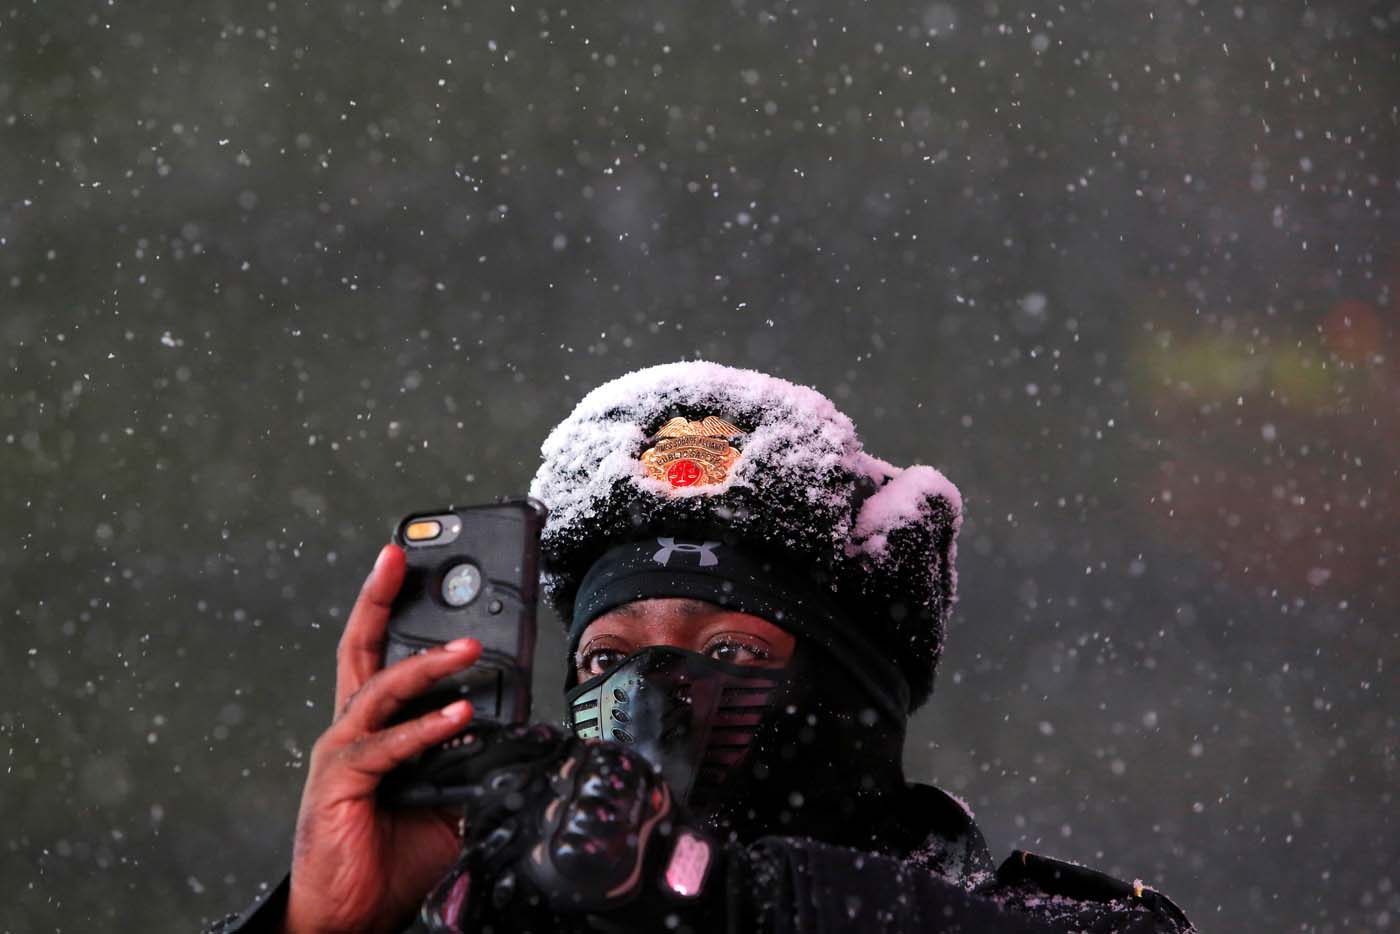 Times Square Public Safety Sergeant Baldwin Davis captures falling snow with his cellular device in Times Square in Manhattan, New York, U.S., March 14, 2017. REUTERS/Andrew Kelly